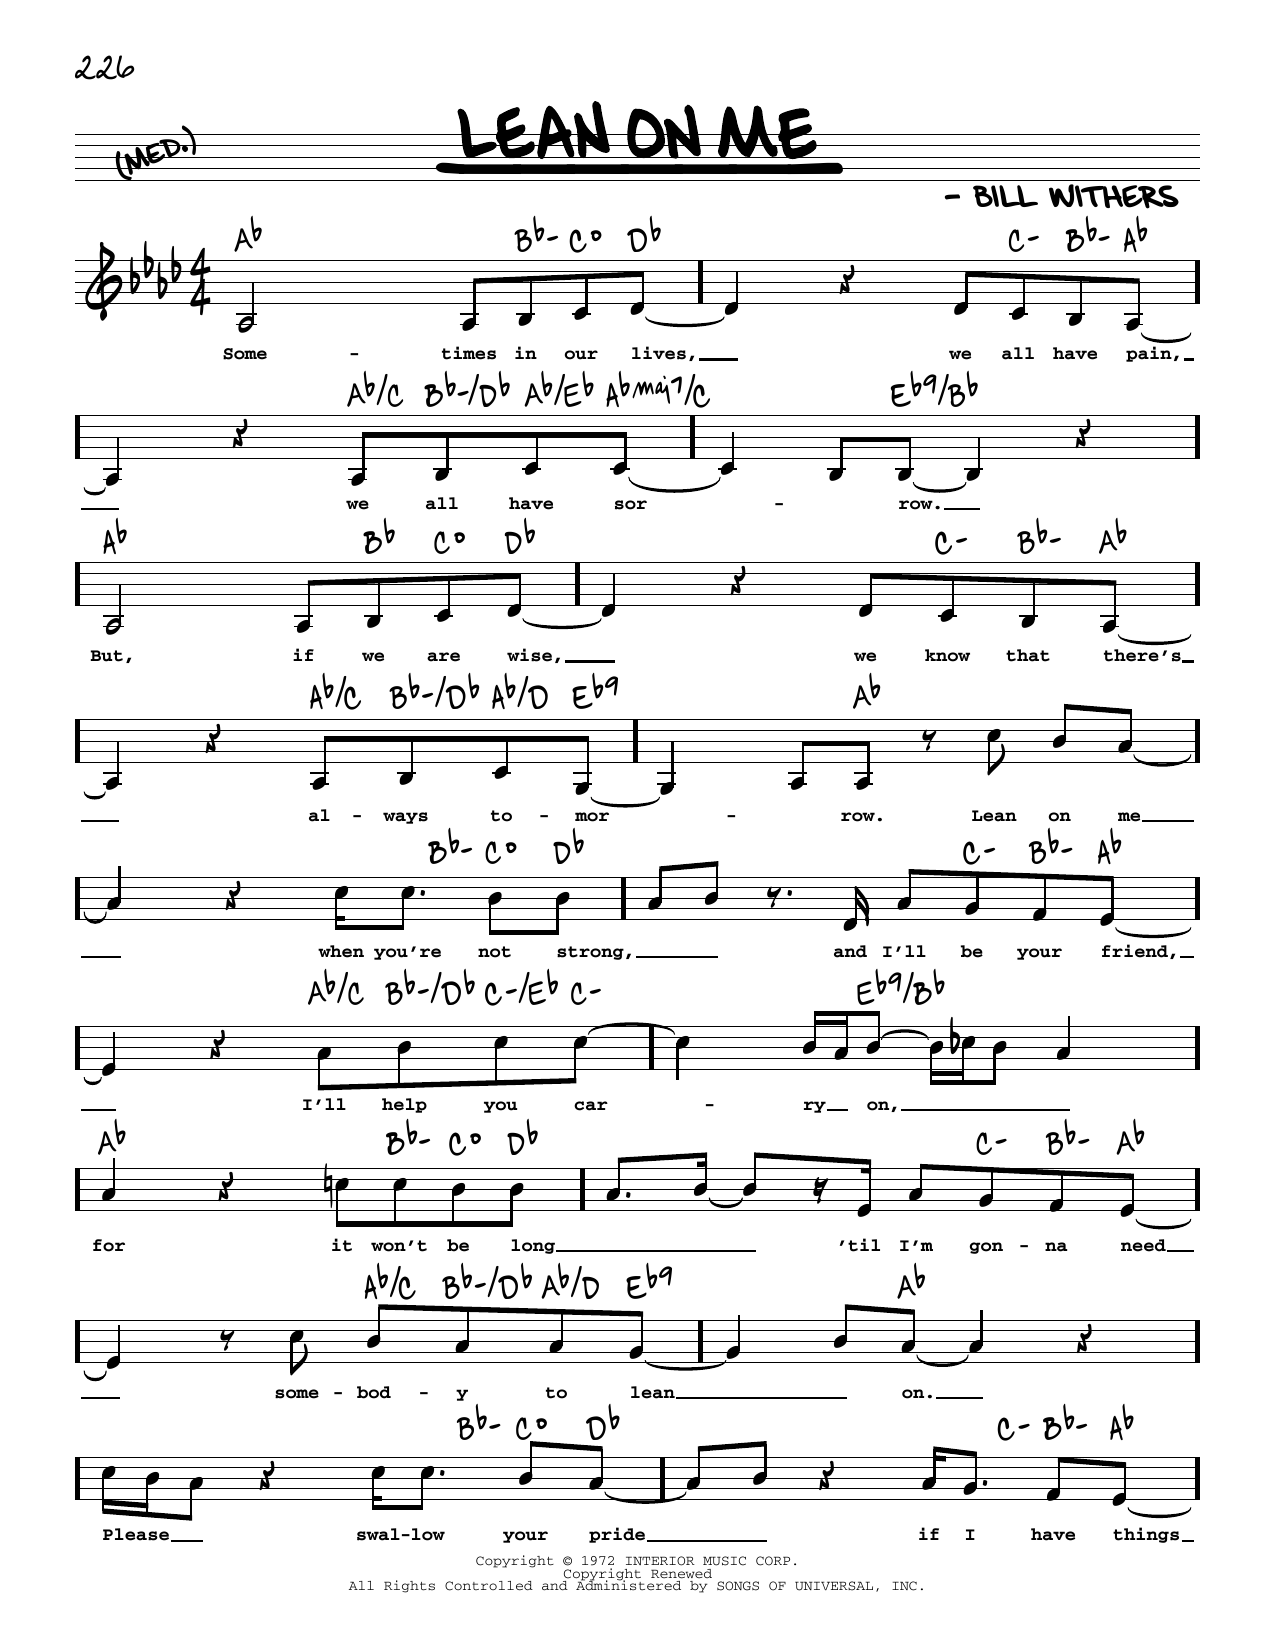 Download Bill Withers Lean On Me (Low Voice) Sheet Music